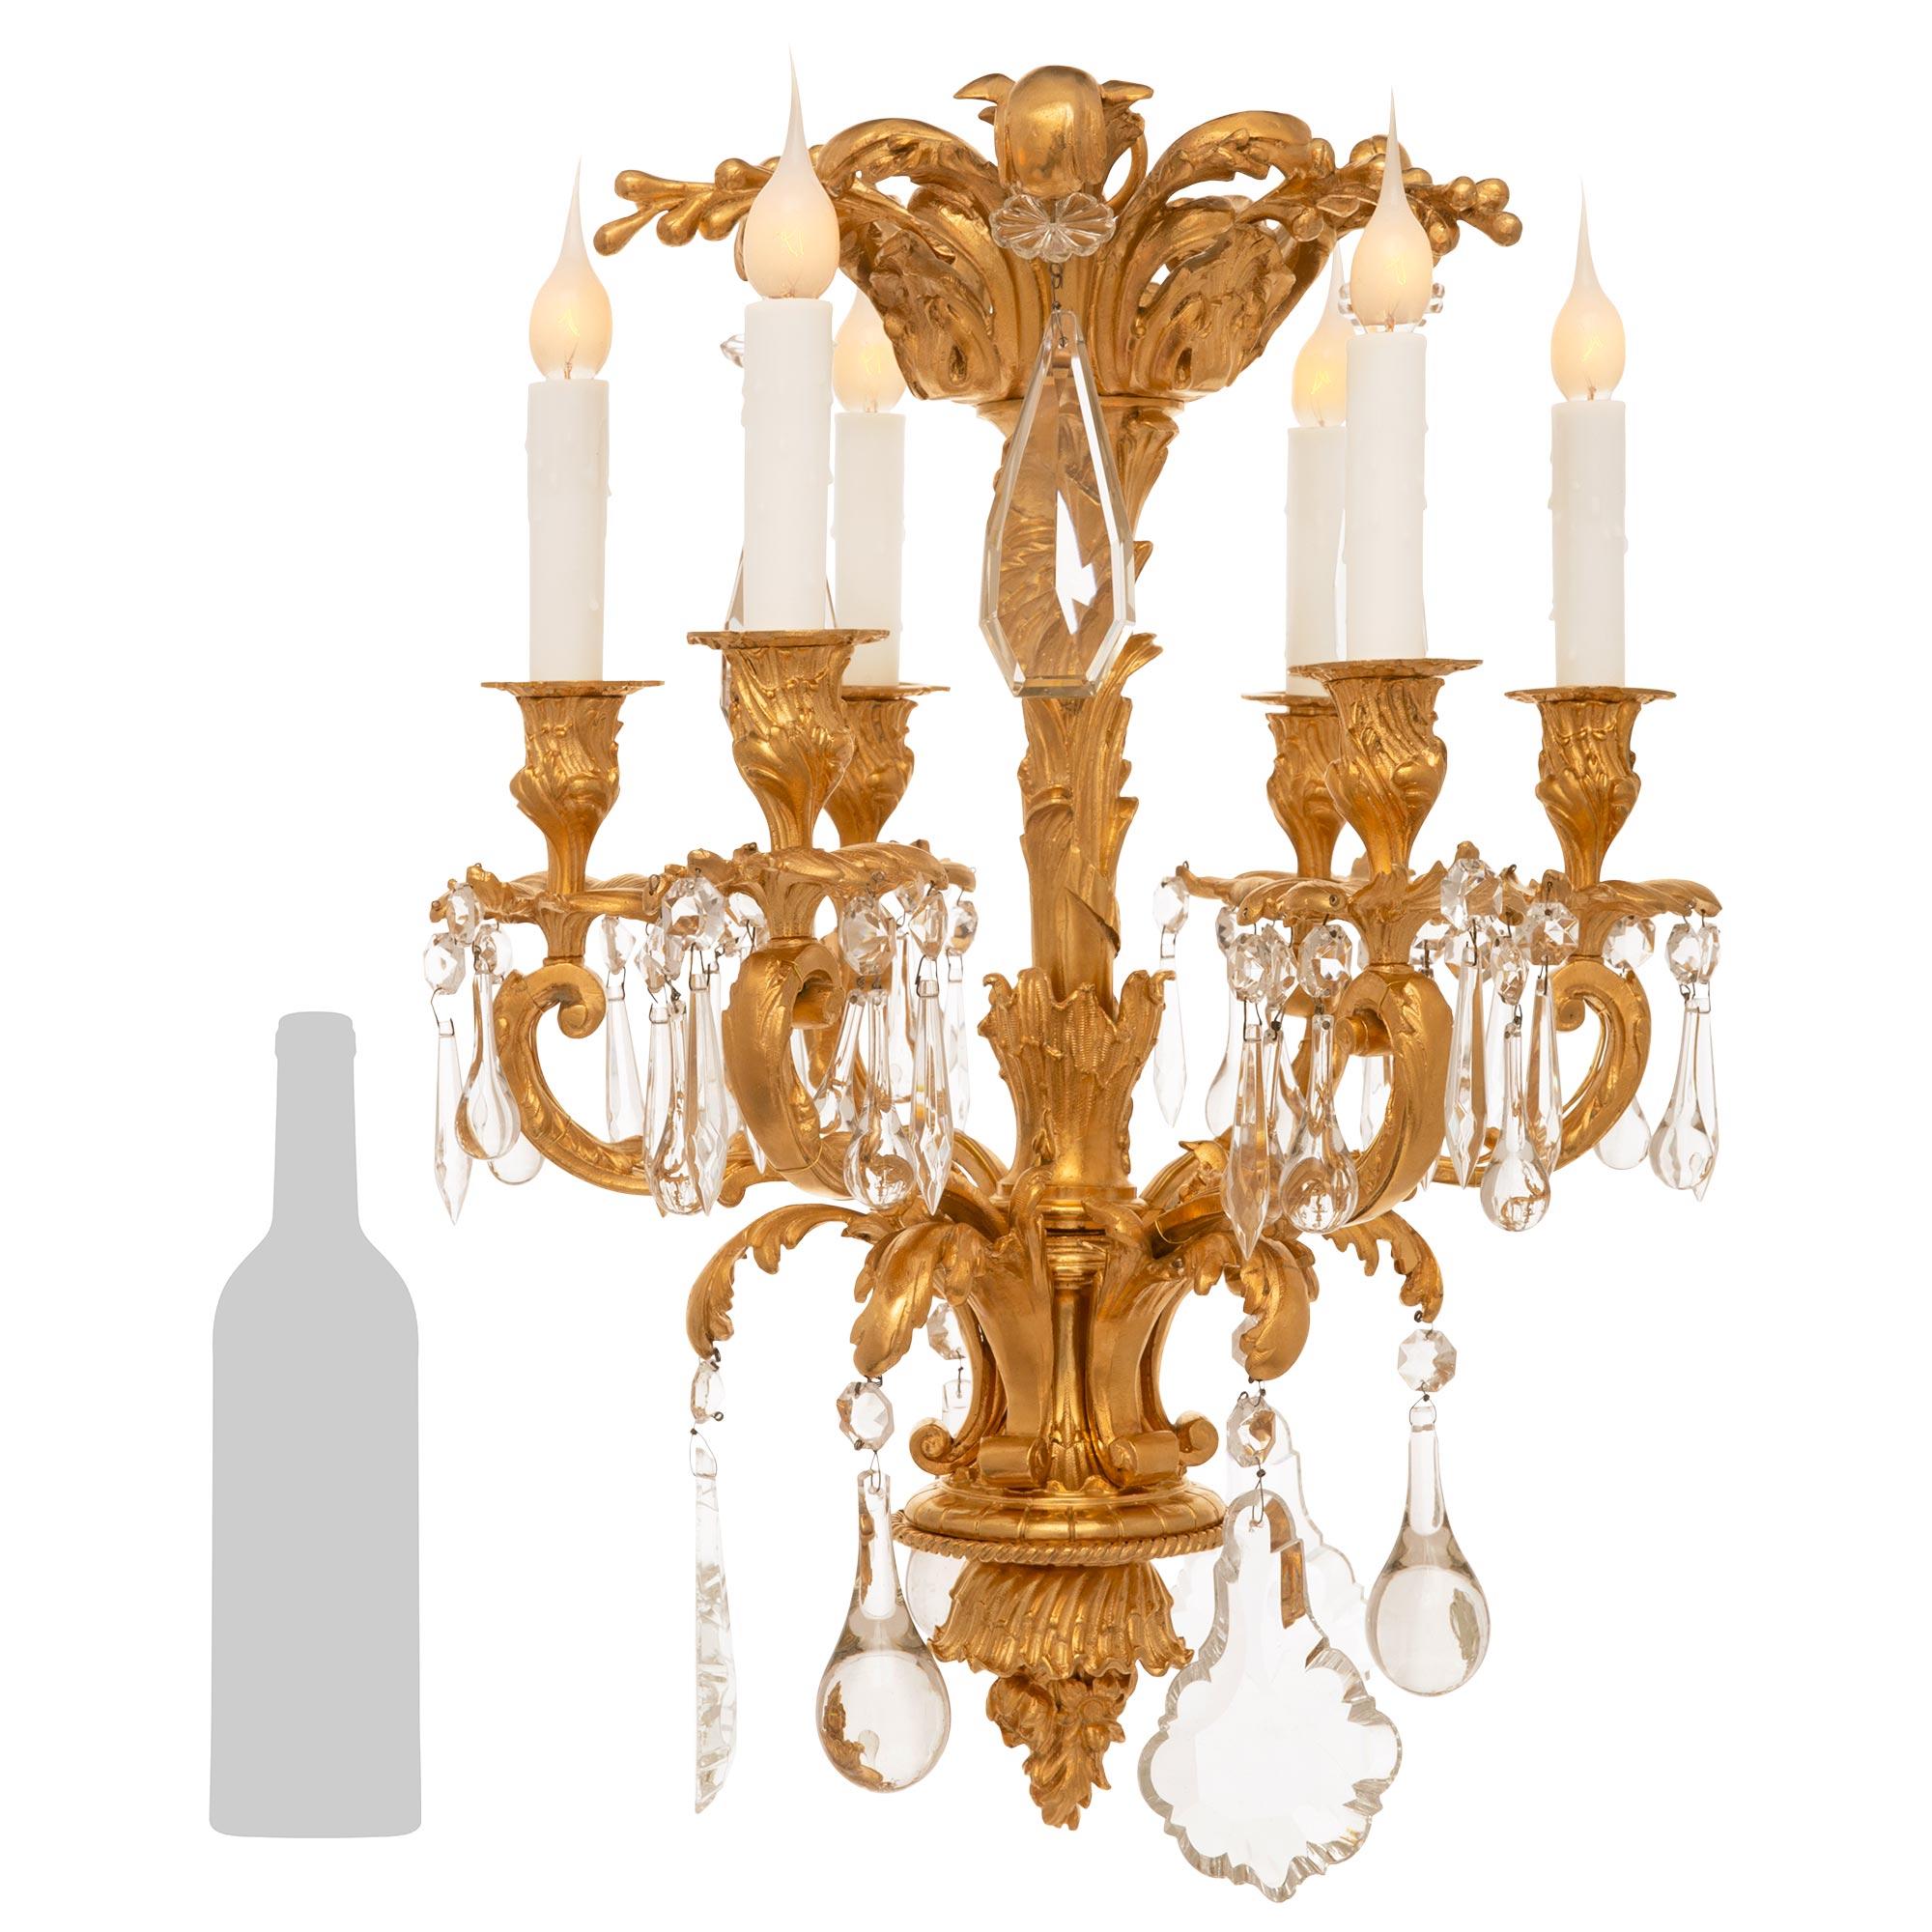 








A small French 19th century Louis XV st. Ormolu and Crystal chandelier. The six arm chandelier displays a central fut decorated with foliage amidst a twisted ribbon. The fut is surrounded by the six scrolled arms leading to the scalloped